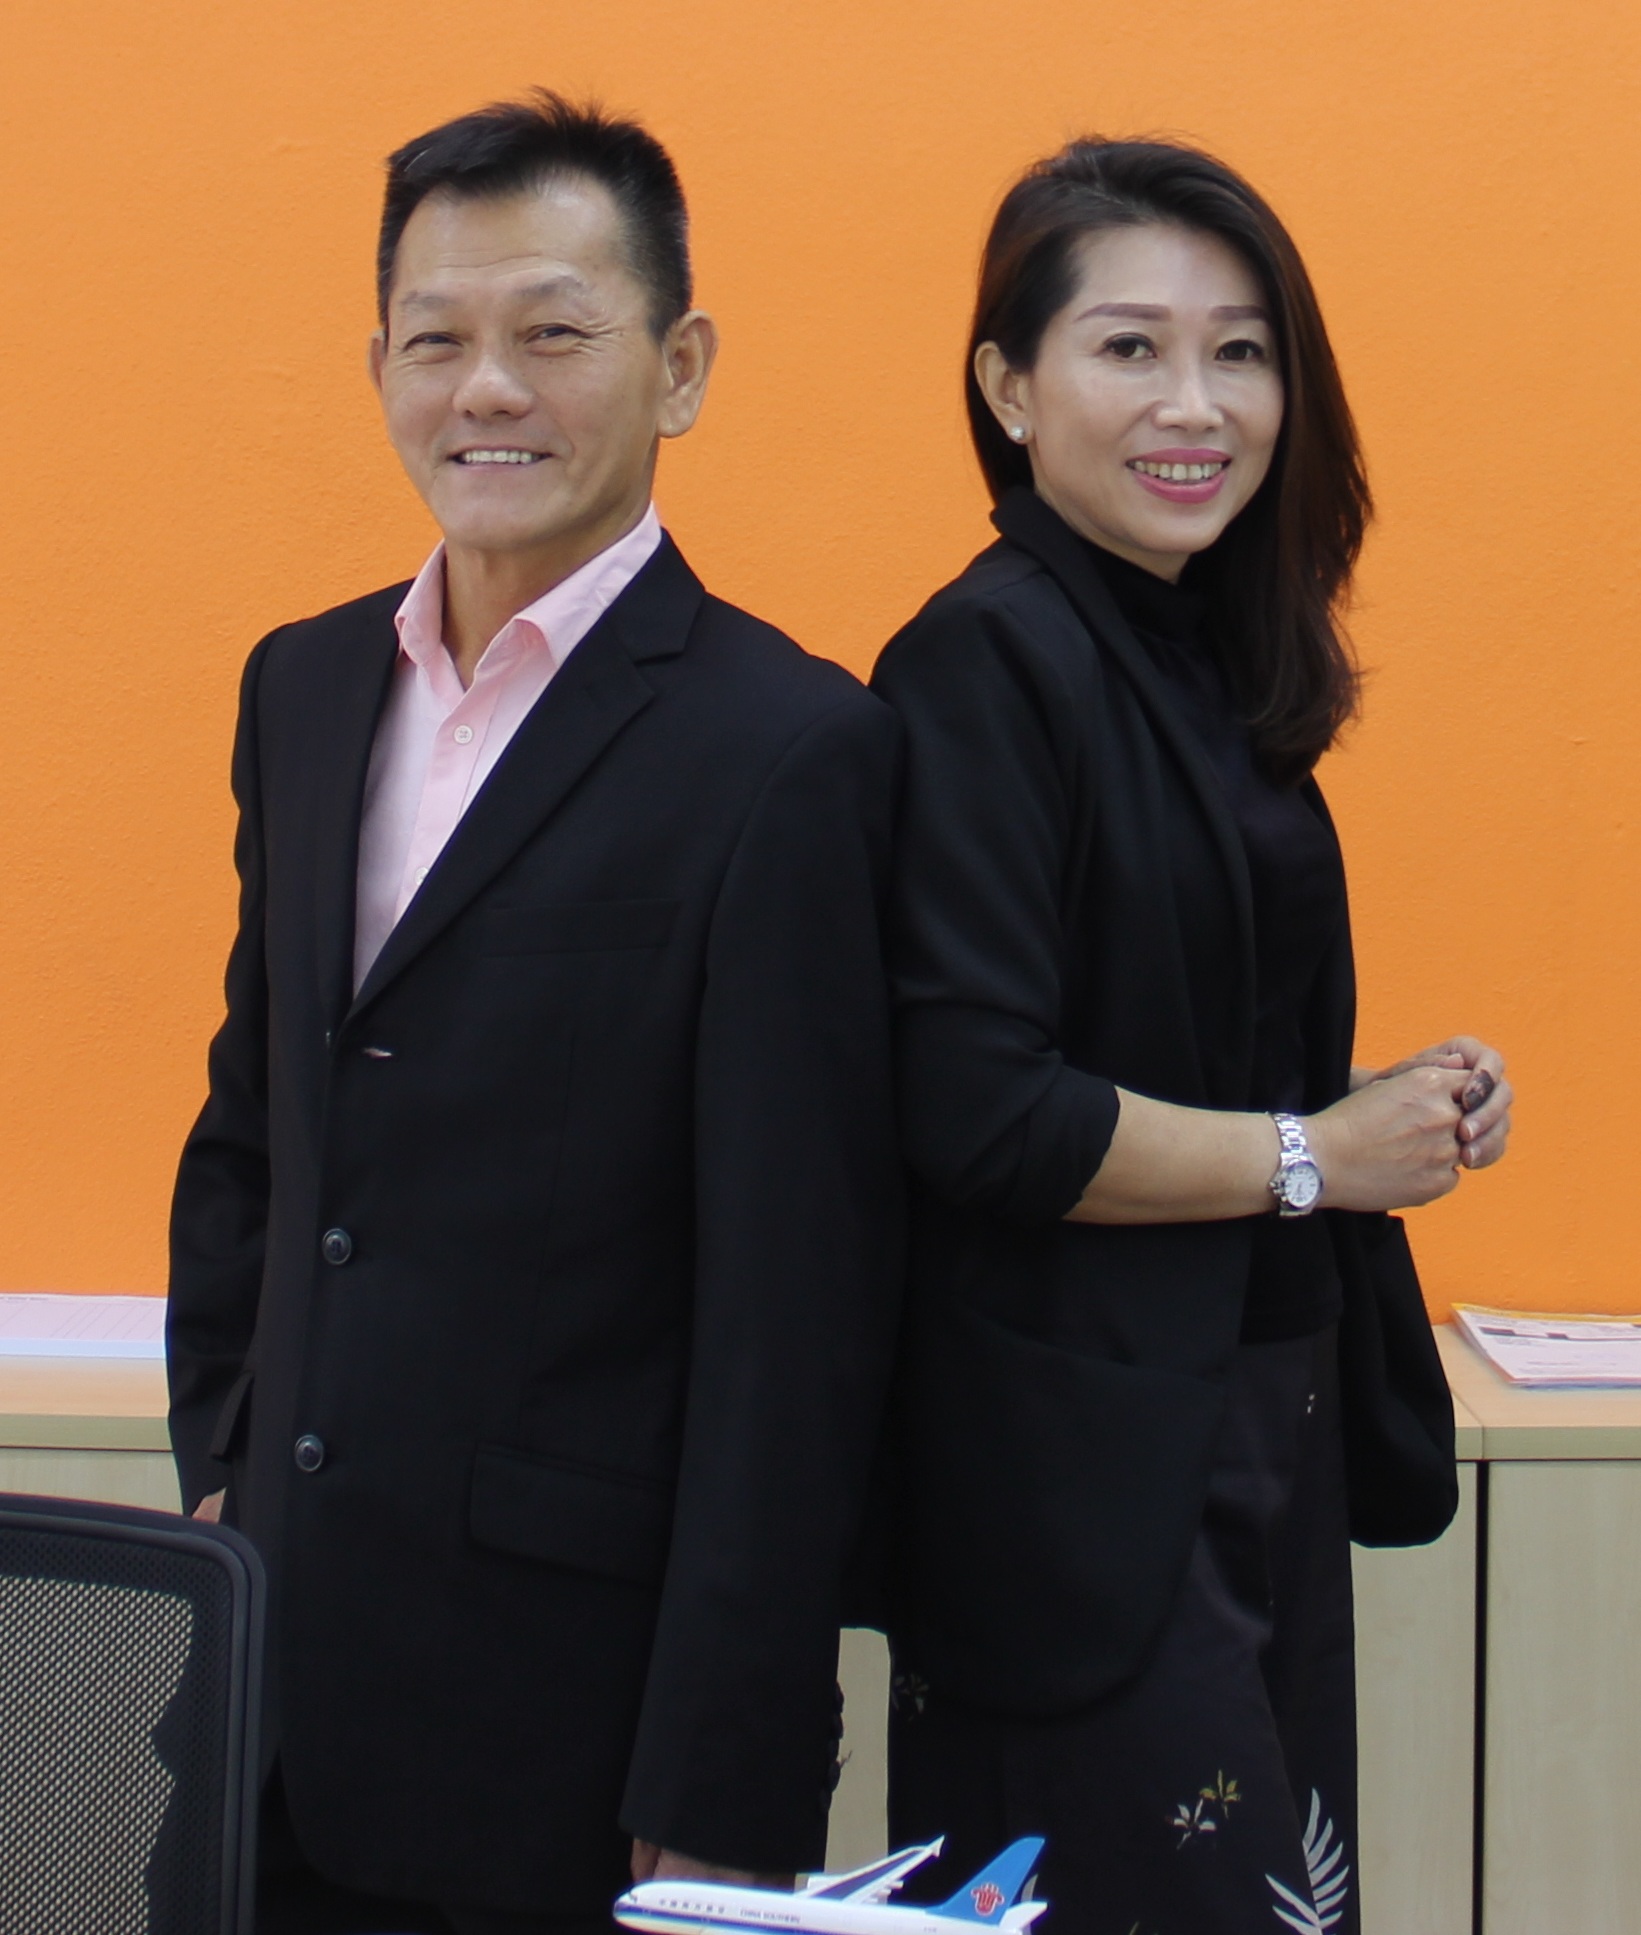 The founders of Sunshine Travel are Hong Zichao (Allen) and Chen Peisi (Patsee).